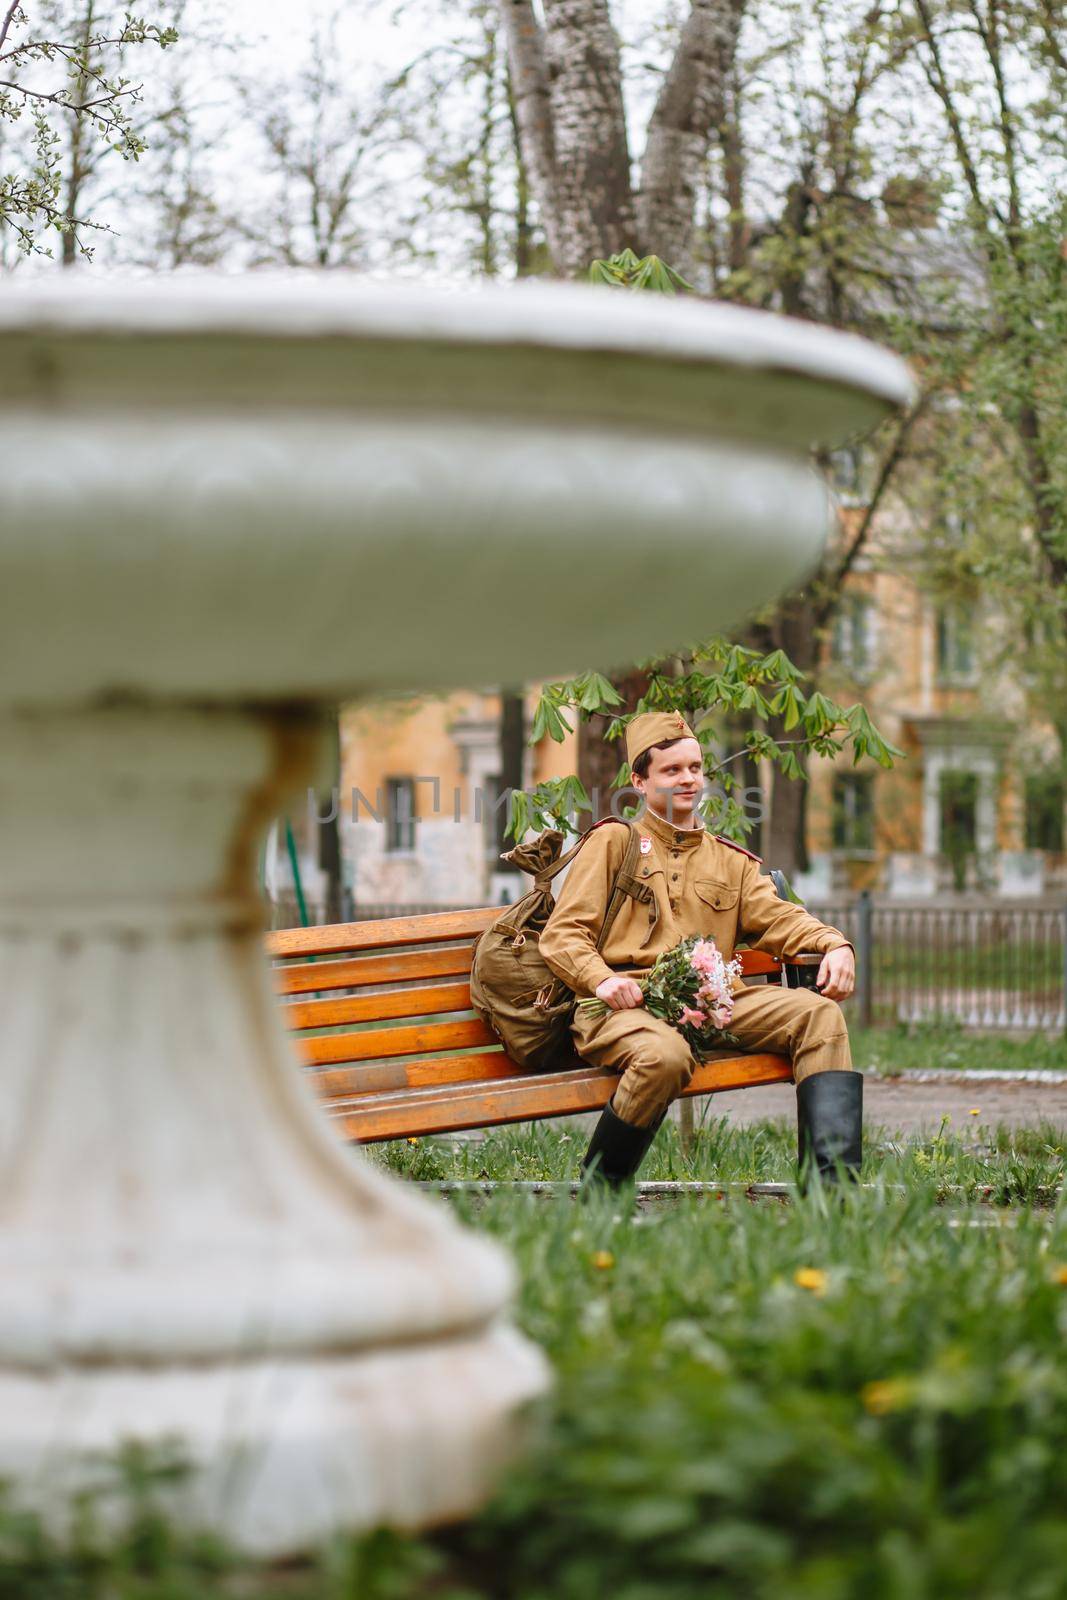 A soldier sitting on a bench waiting with a bouquet in his hands